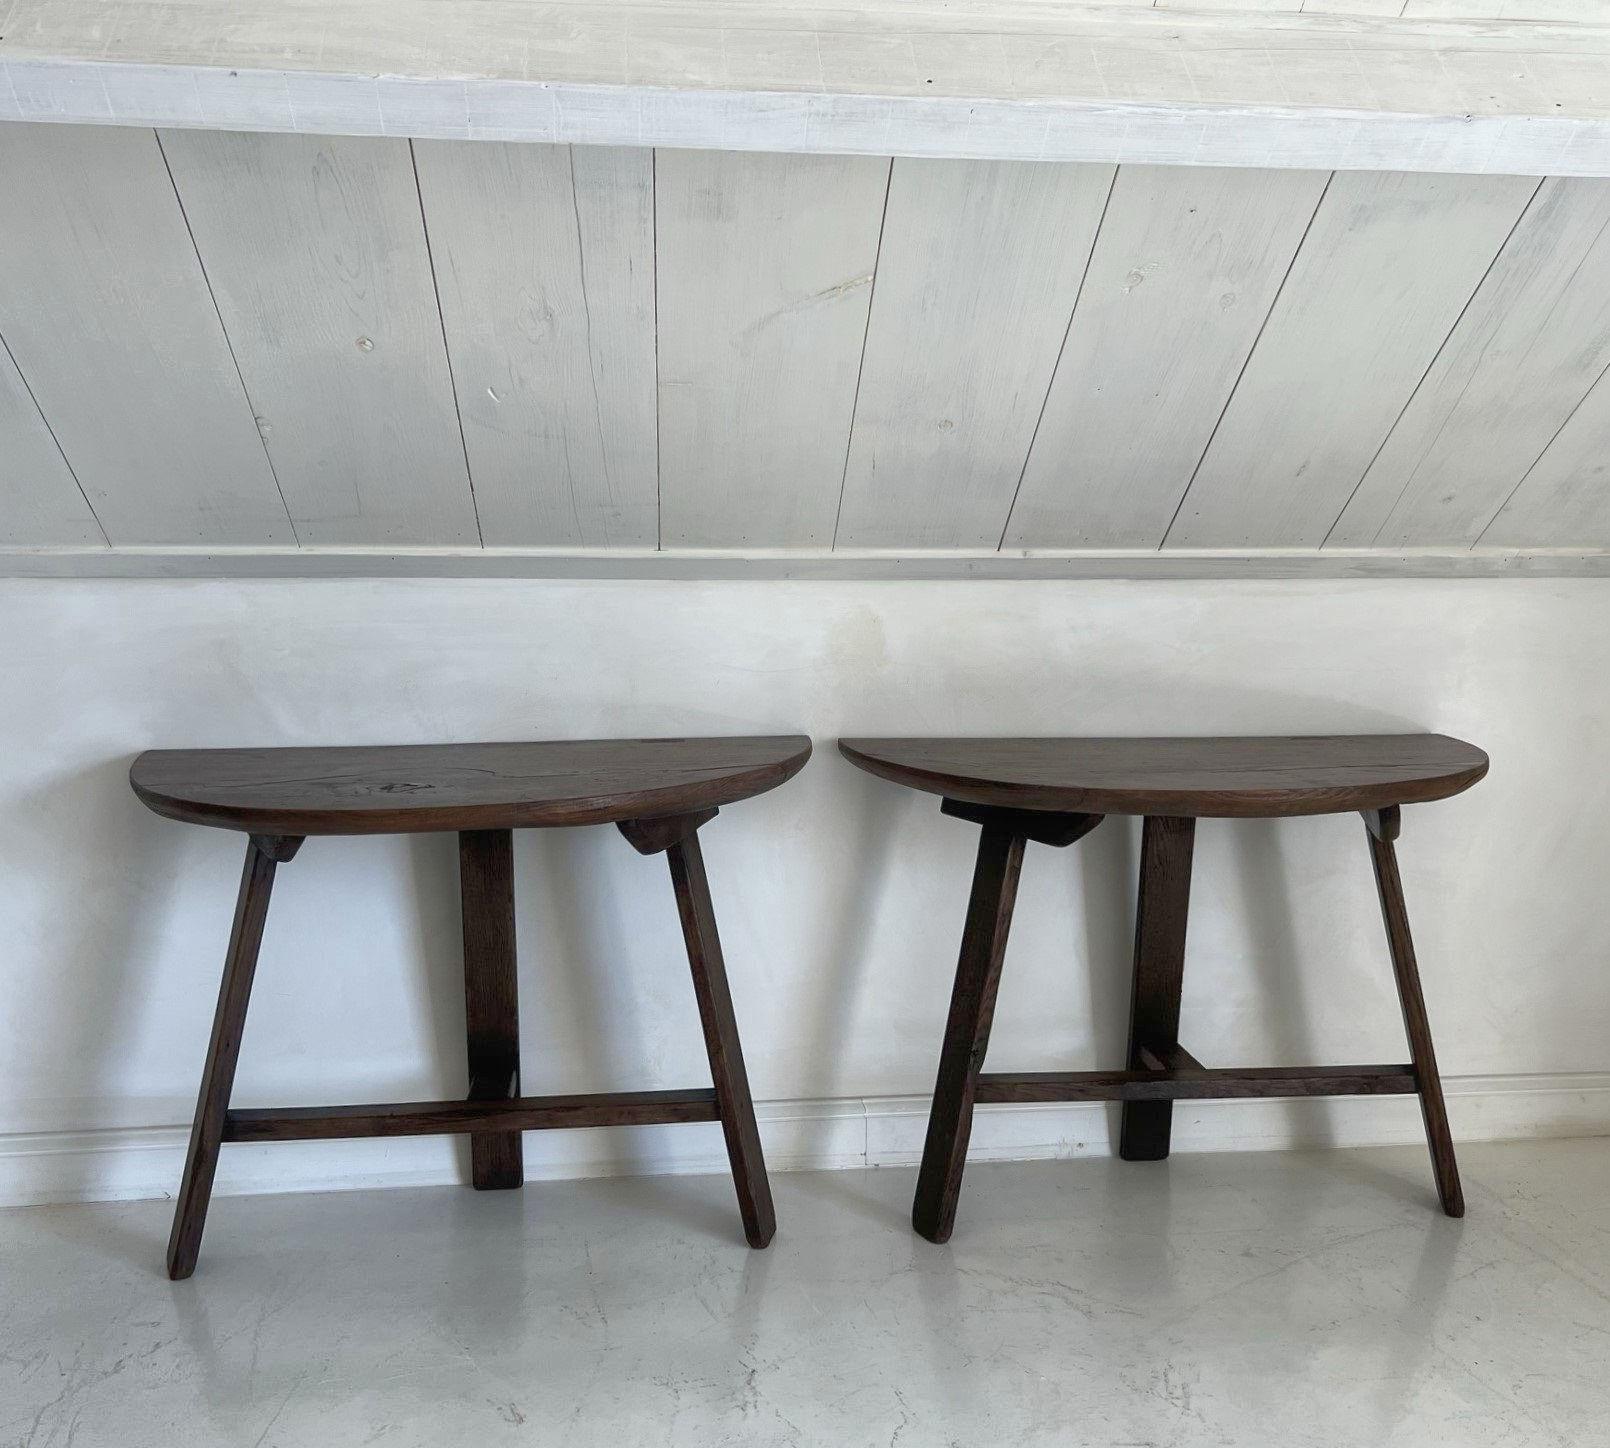 Hand-Crafted Set of 2 19th Century Primitive Chestnut Demilune Tables For Sale